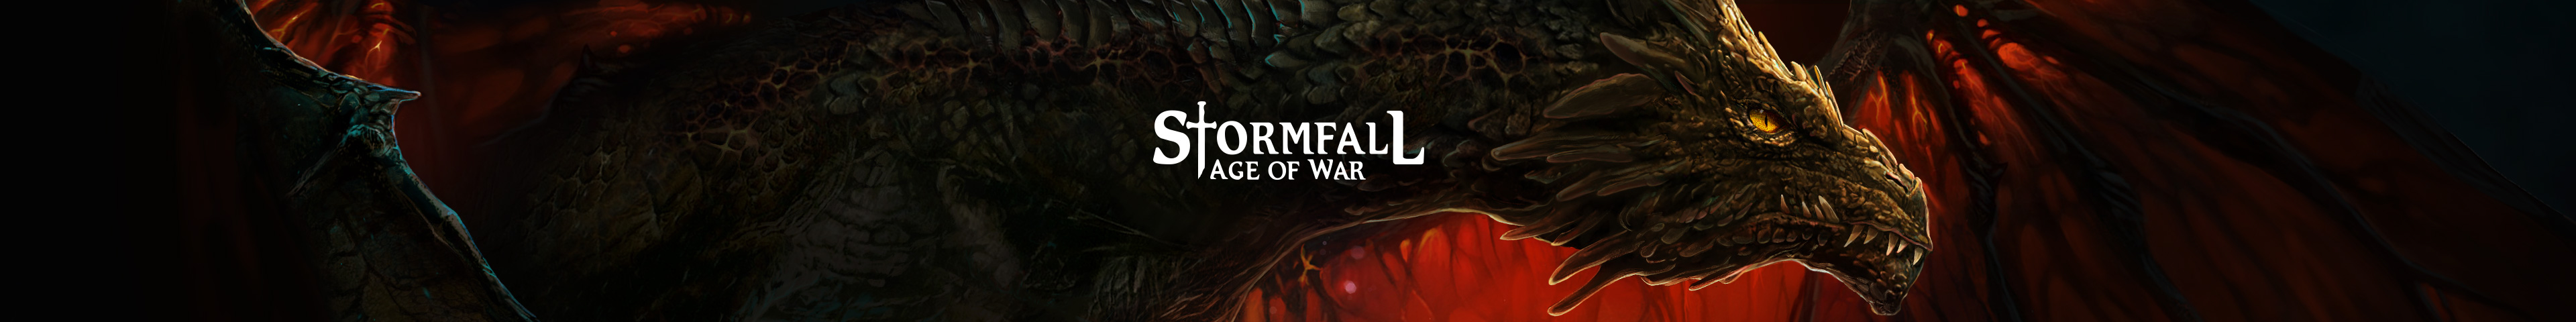 The old Stormfall wiki pages will be maintained!